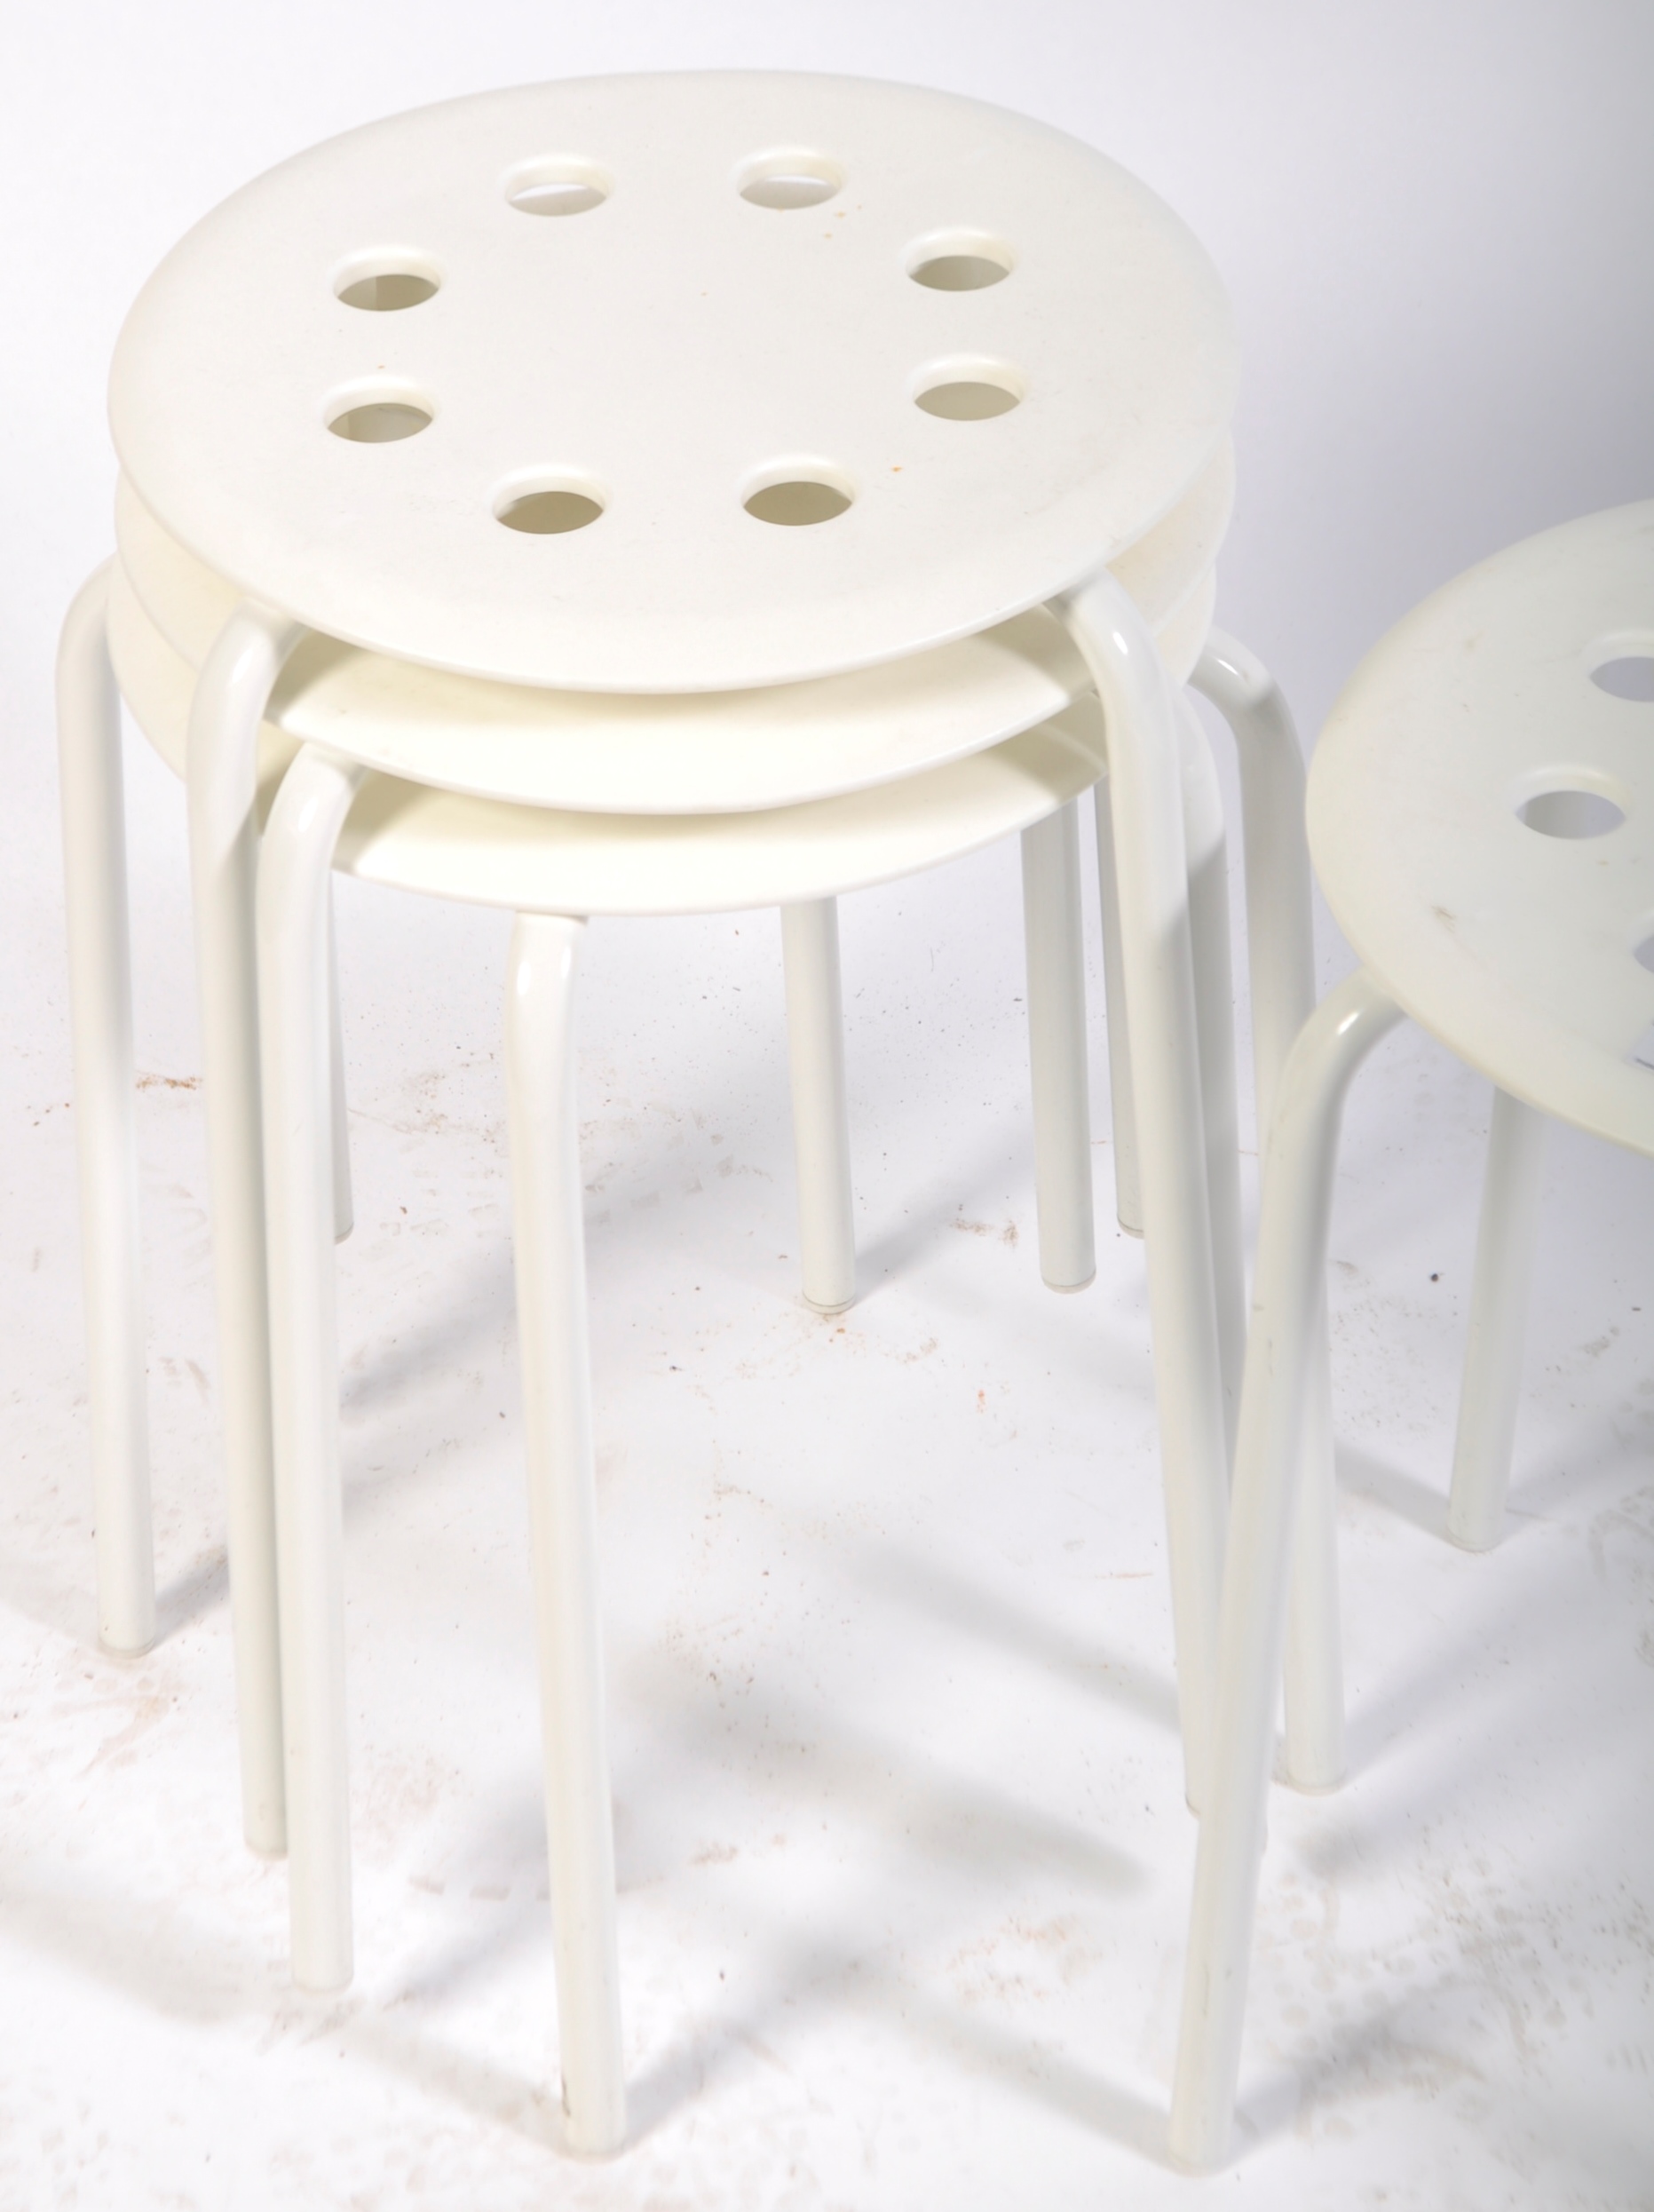 MATCHING SET OF FOUR CONTEMPORARY STOOLS - Image 2 of 3